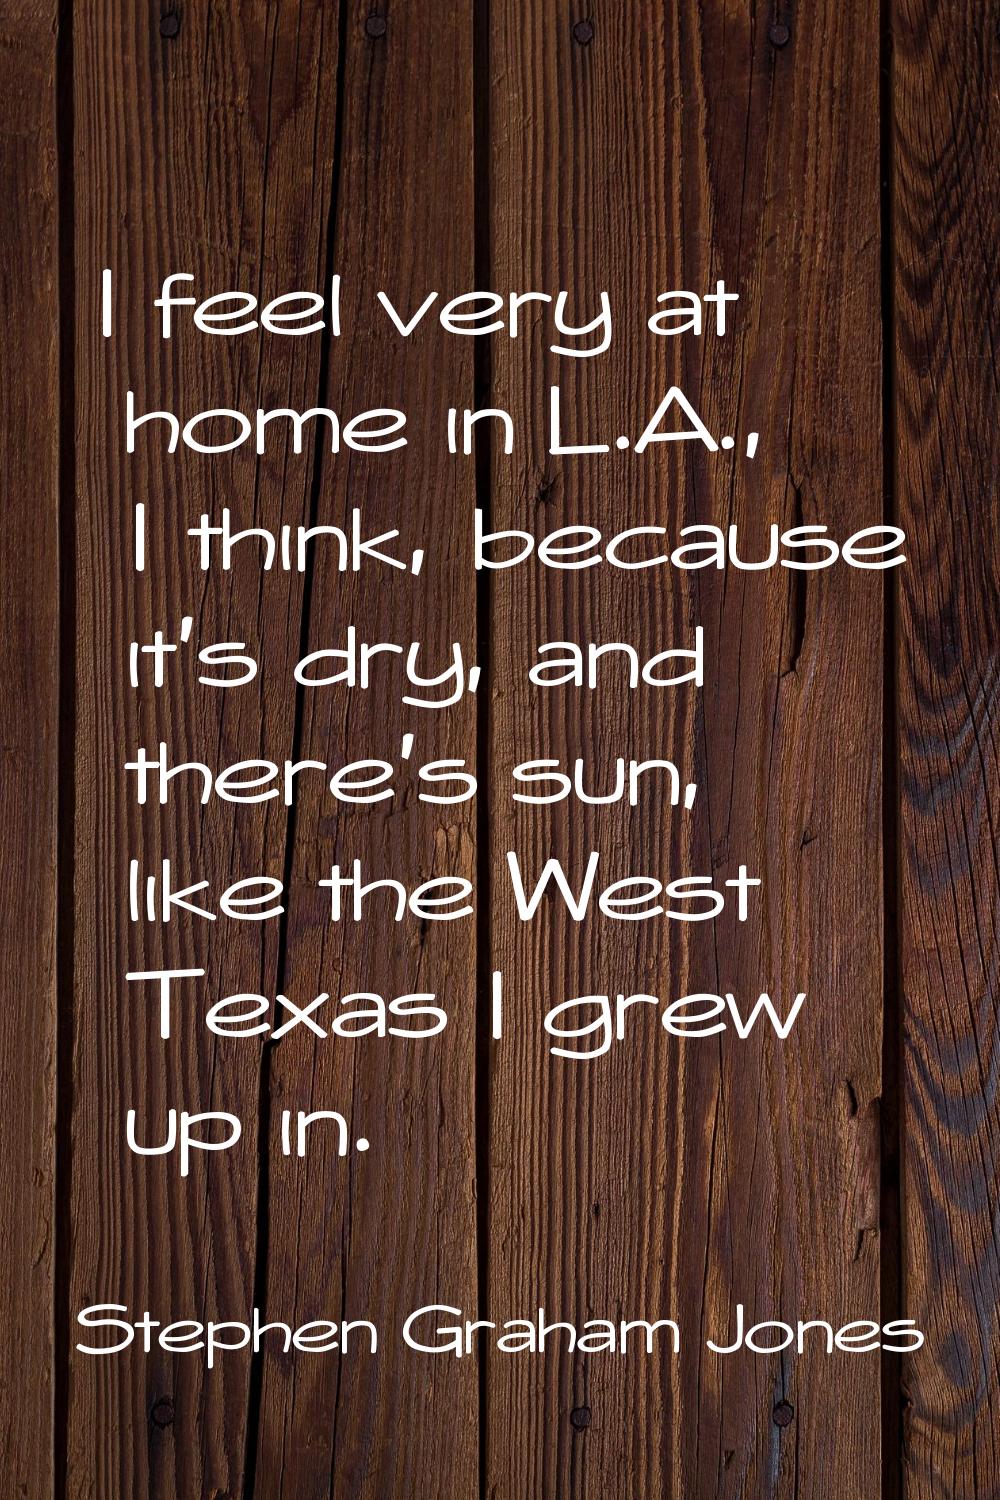 I feel very at home in L.A., I think, because it's dry, and there's sun, like the West Texas I grew